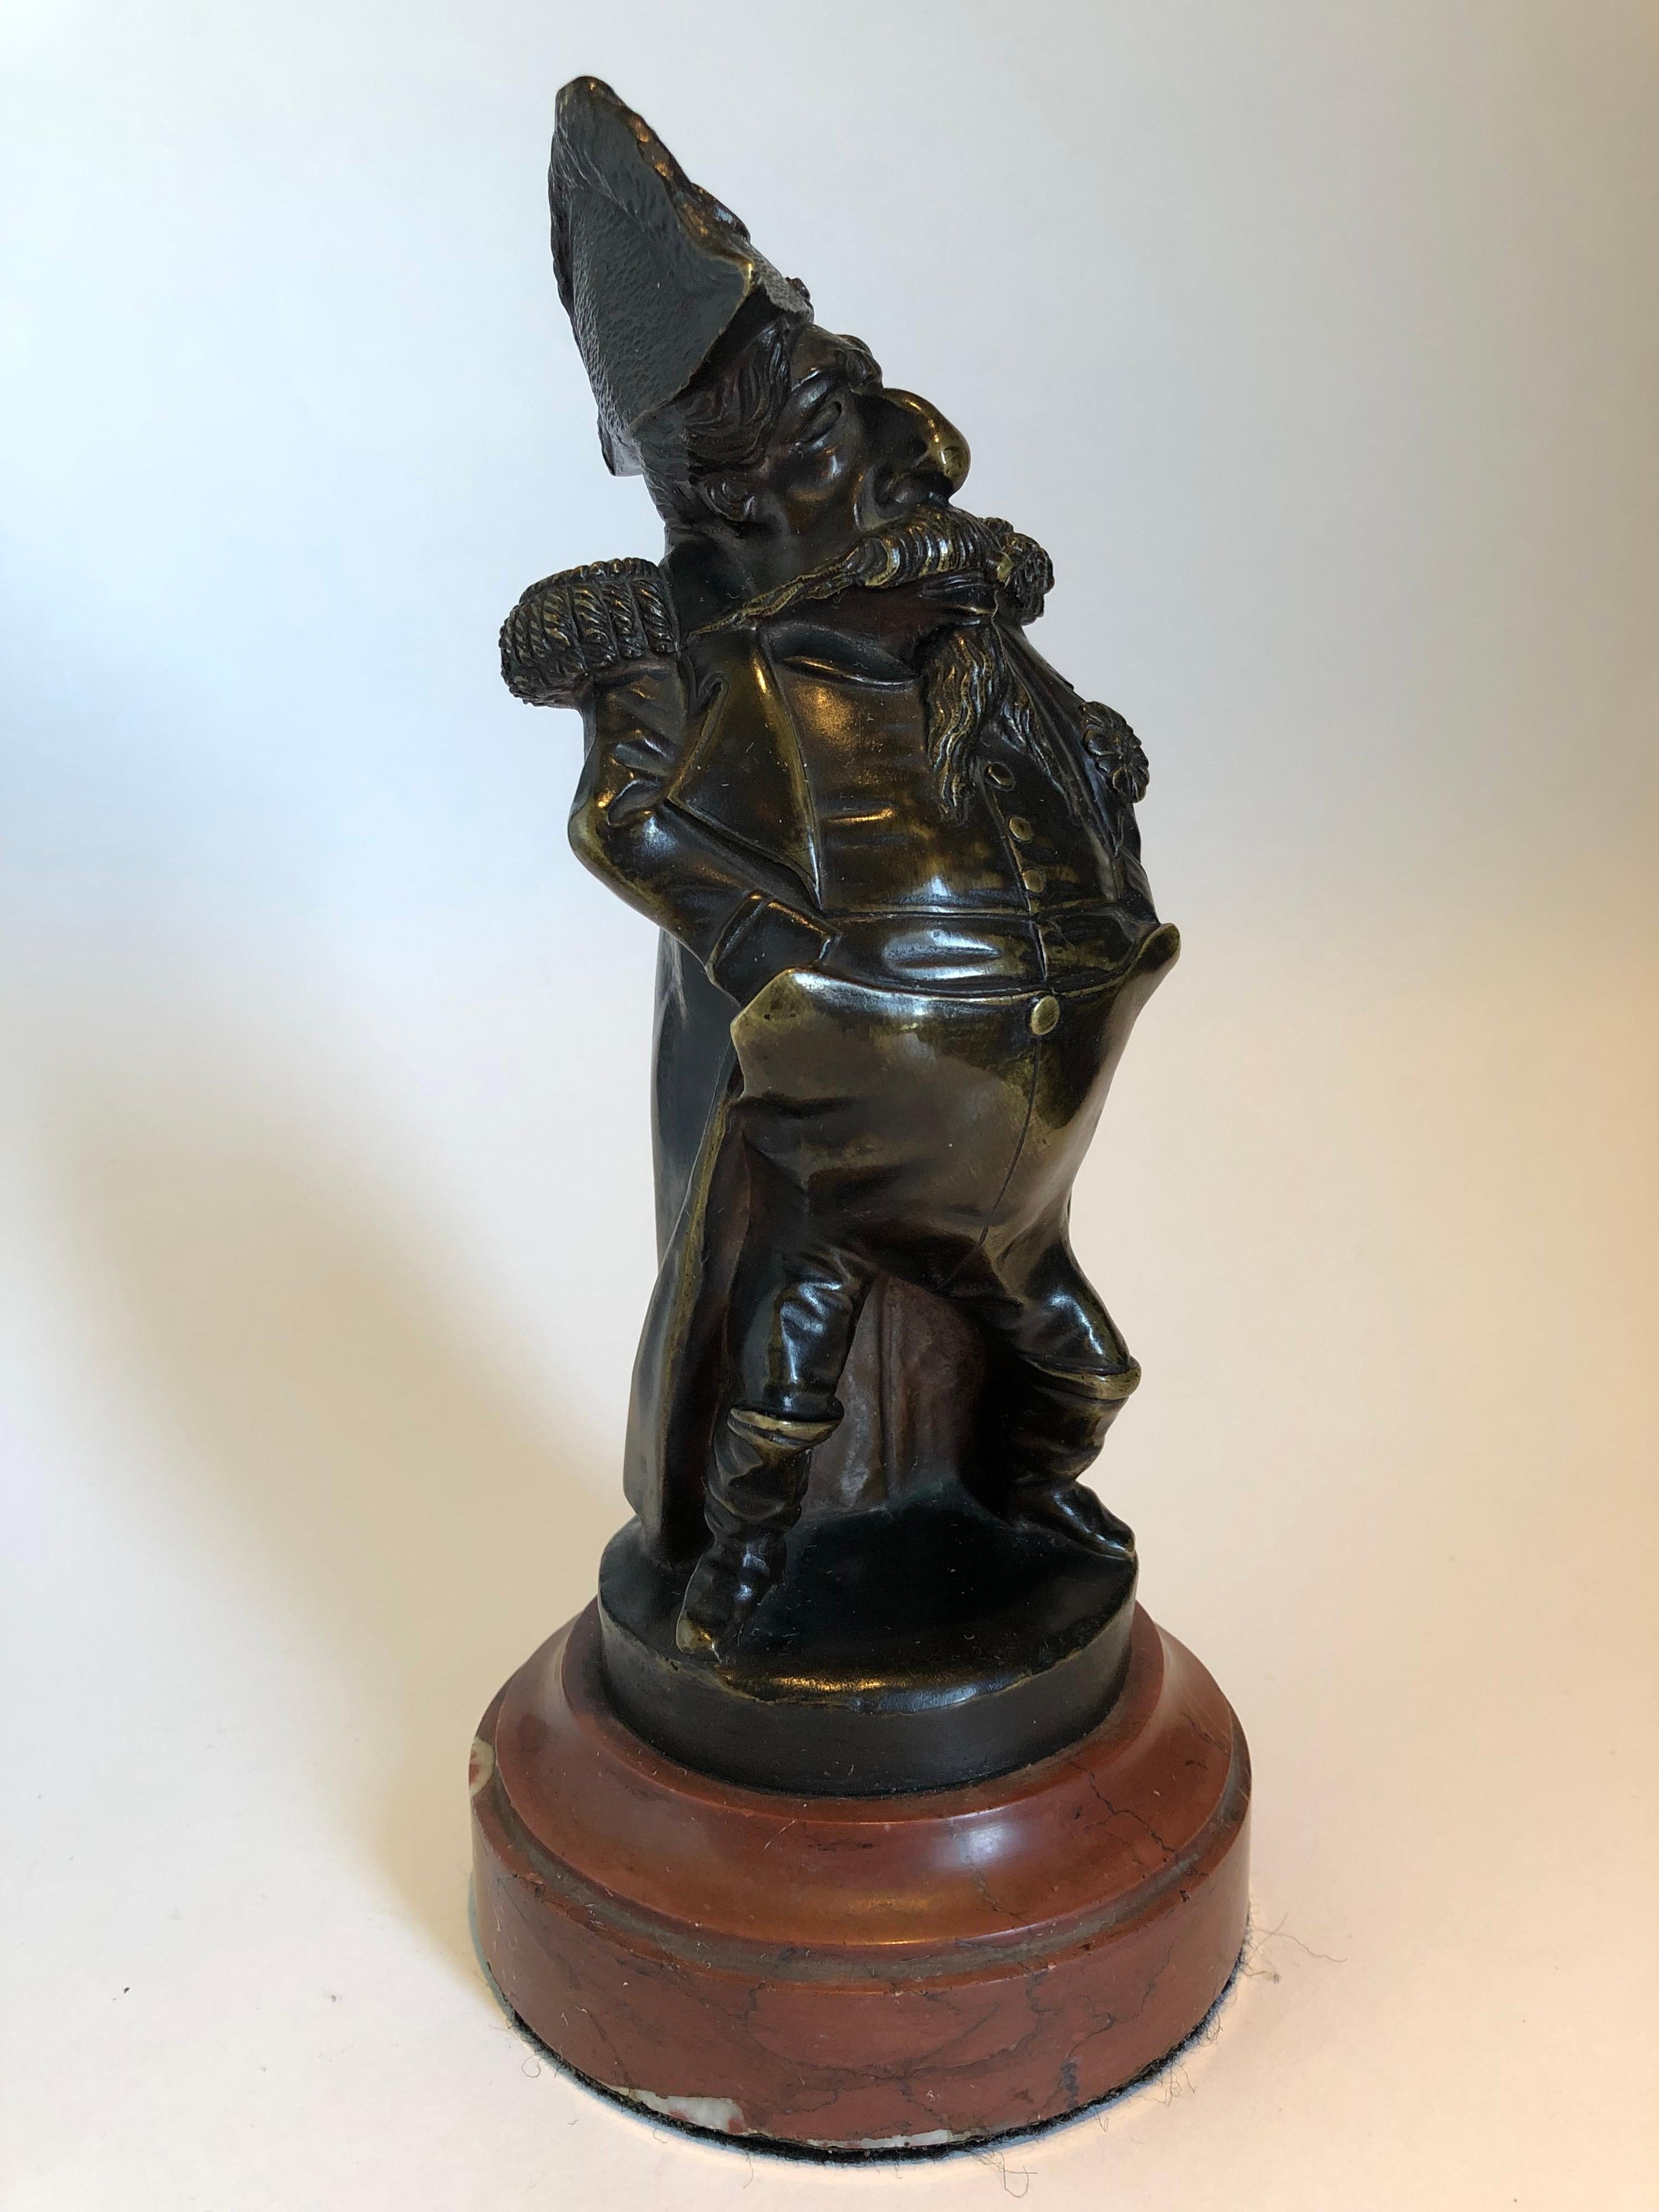 Caricature Napoleon III bronze statuette, Signed HAM late 19th century.
Bronze sculpture of Napoleon III, surellymade after leaving France, 19th century. A satirical political commentary on the status of the Bonaparte dynasty at the time. Marked